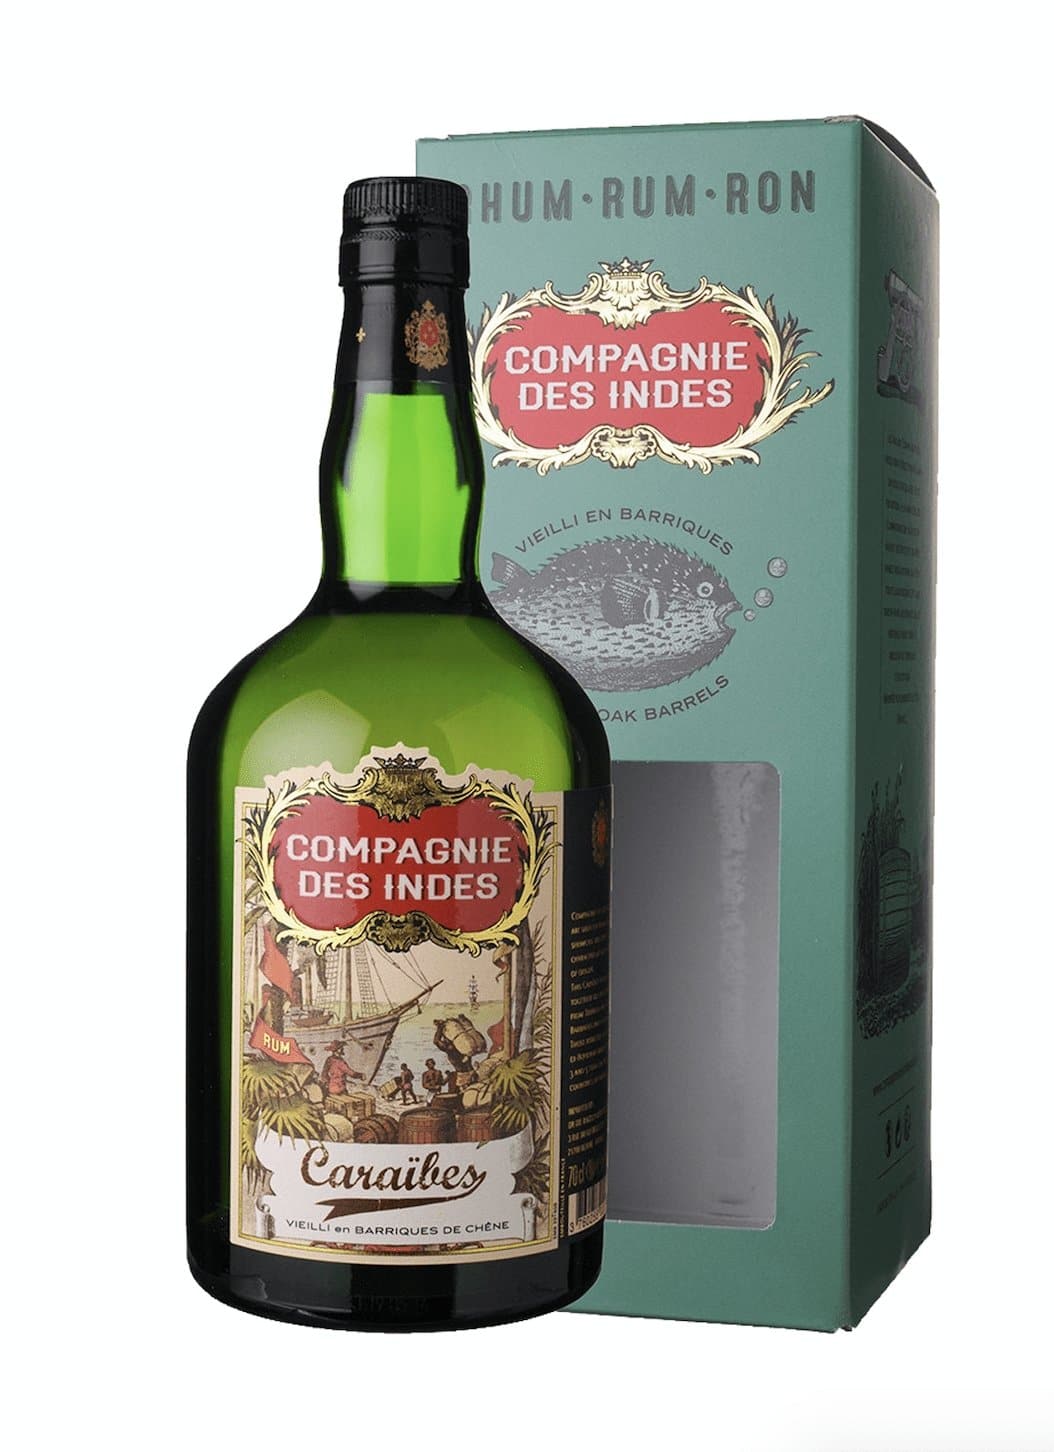 Compagnie des Indes Rum Caraibes 3-5 Years 40% 700ml | Rum | Shop online at Spirits of France